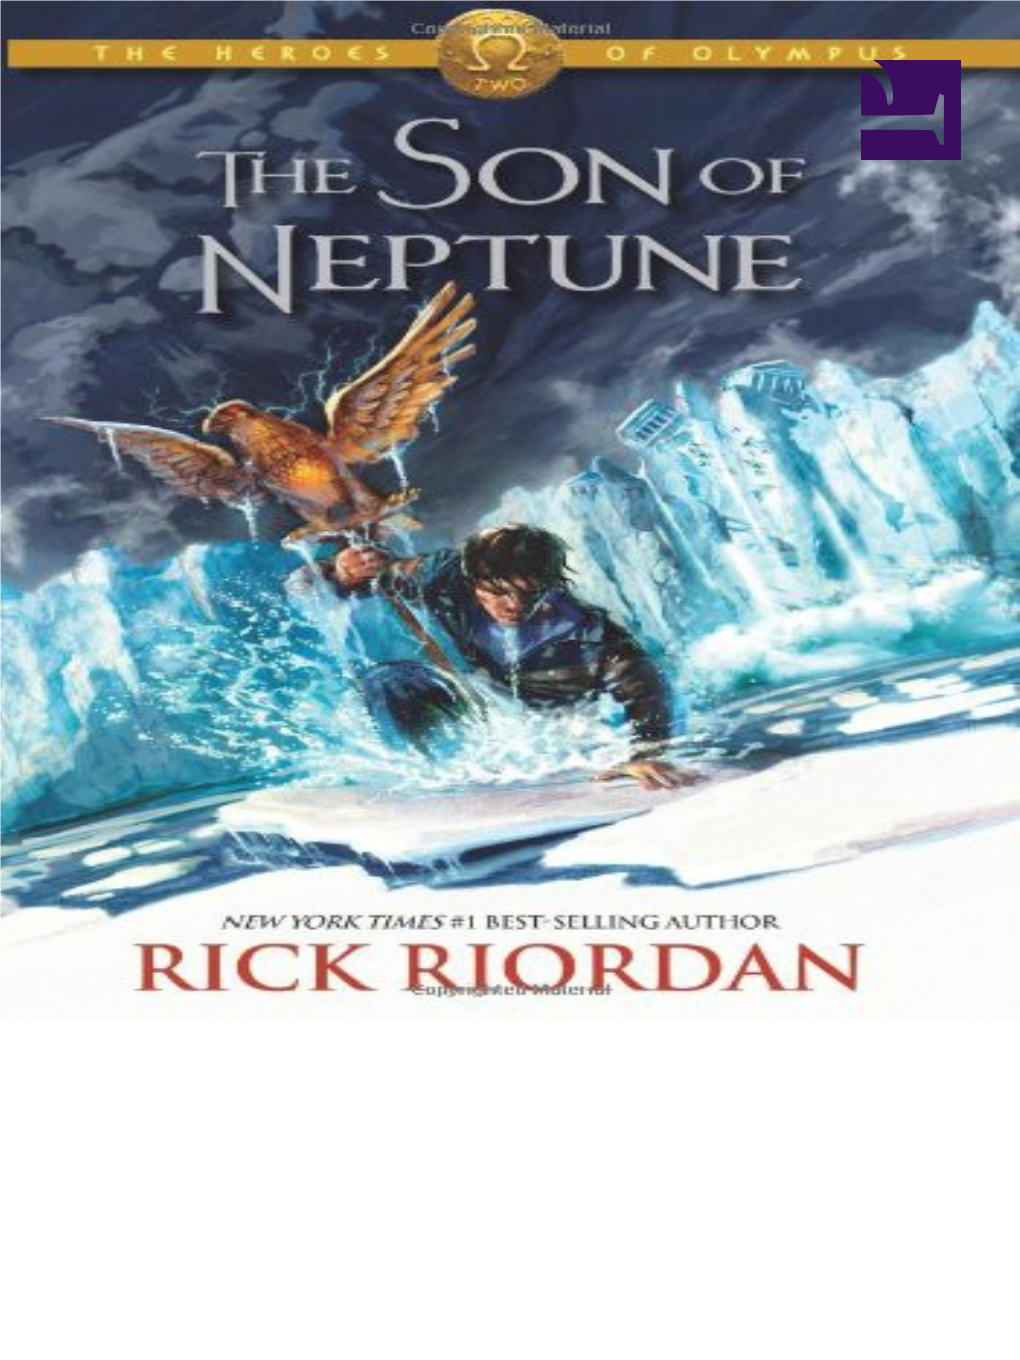 Praise for the Percy Jackson Series by Rick Riordan